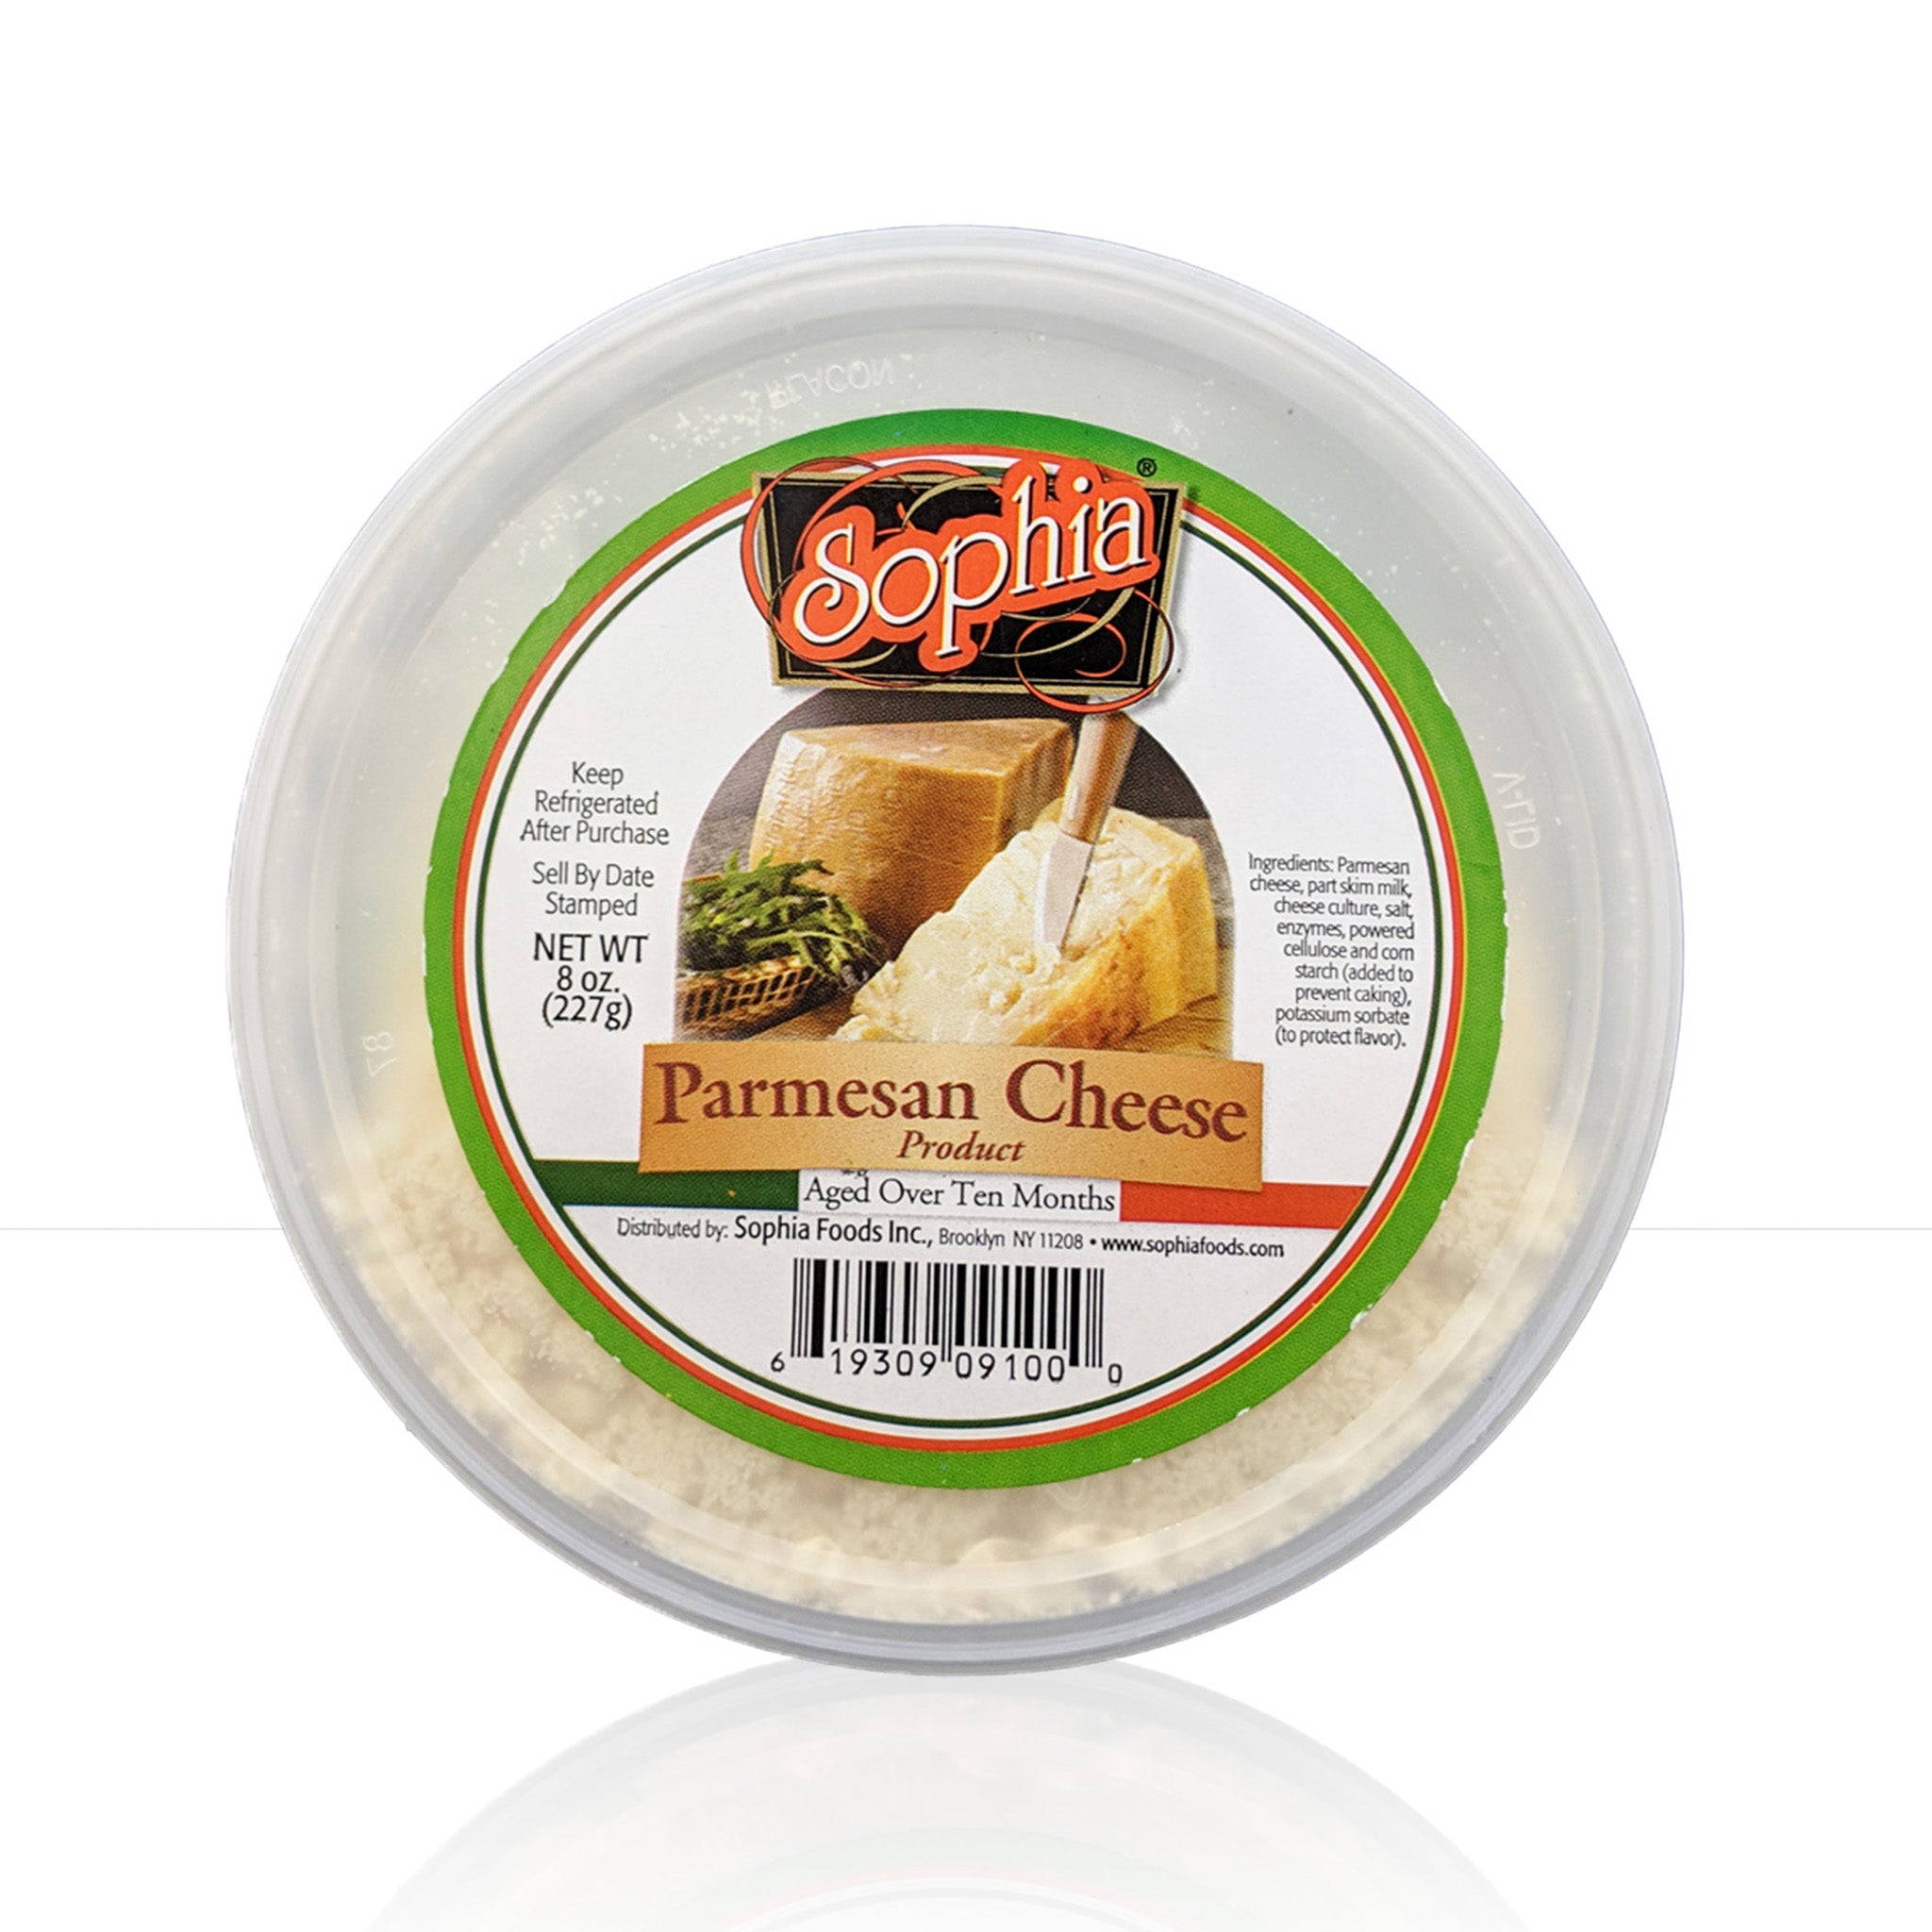 Sophia Cheese Product Deli Cup - Parmesan